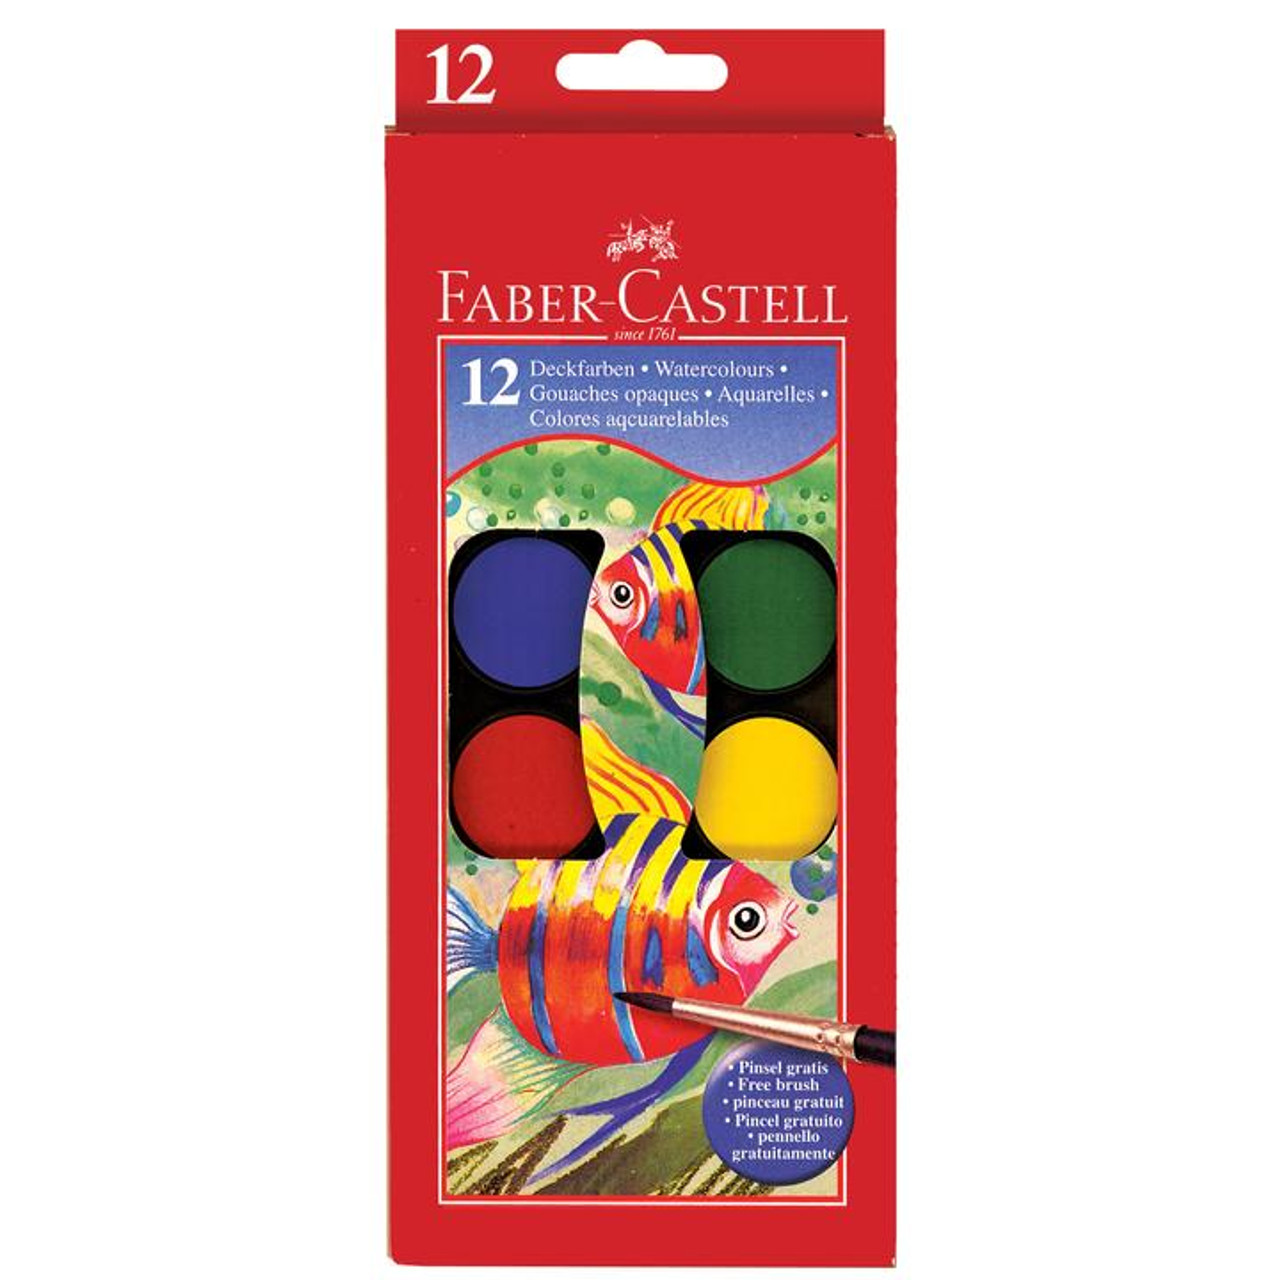 Faber-Castell Watercolor Paint by Number Farmhouse